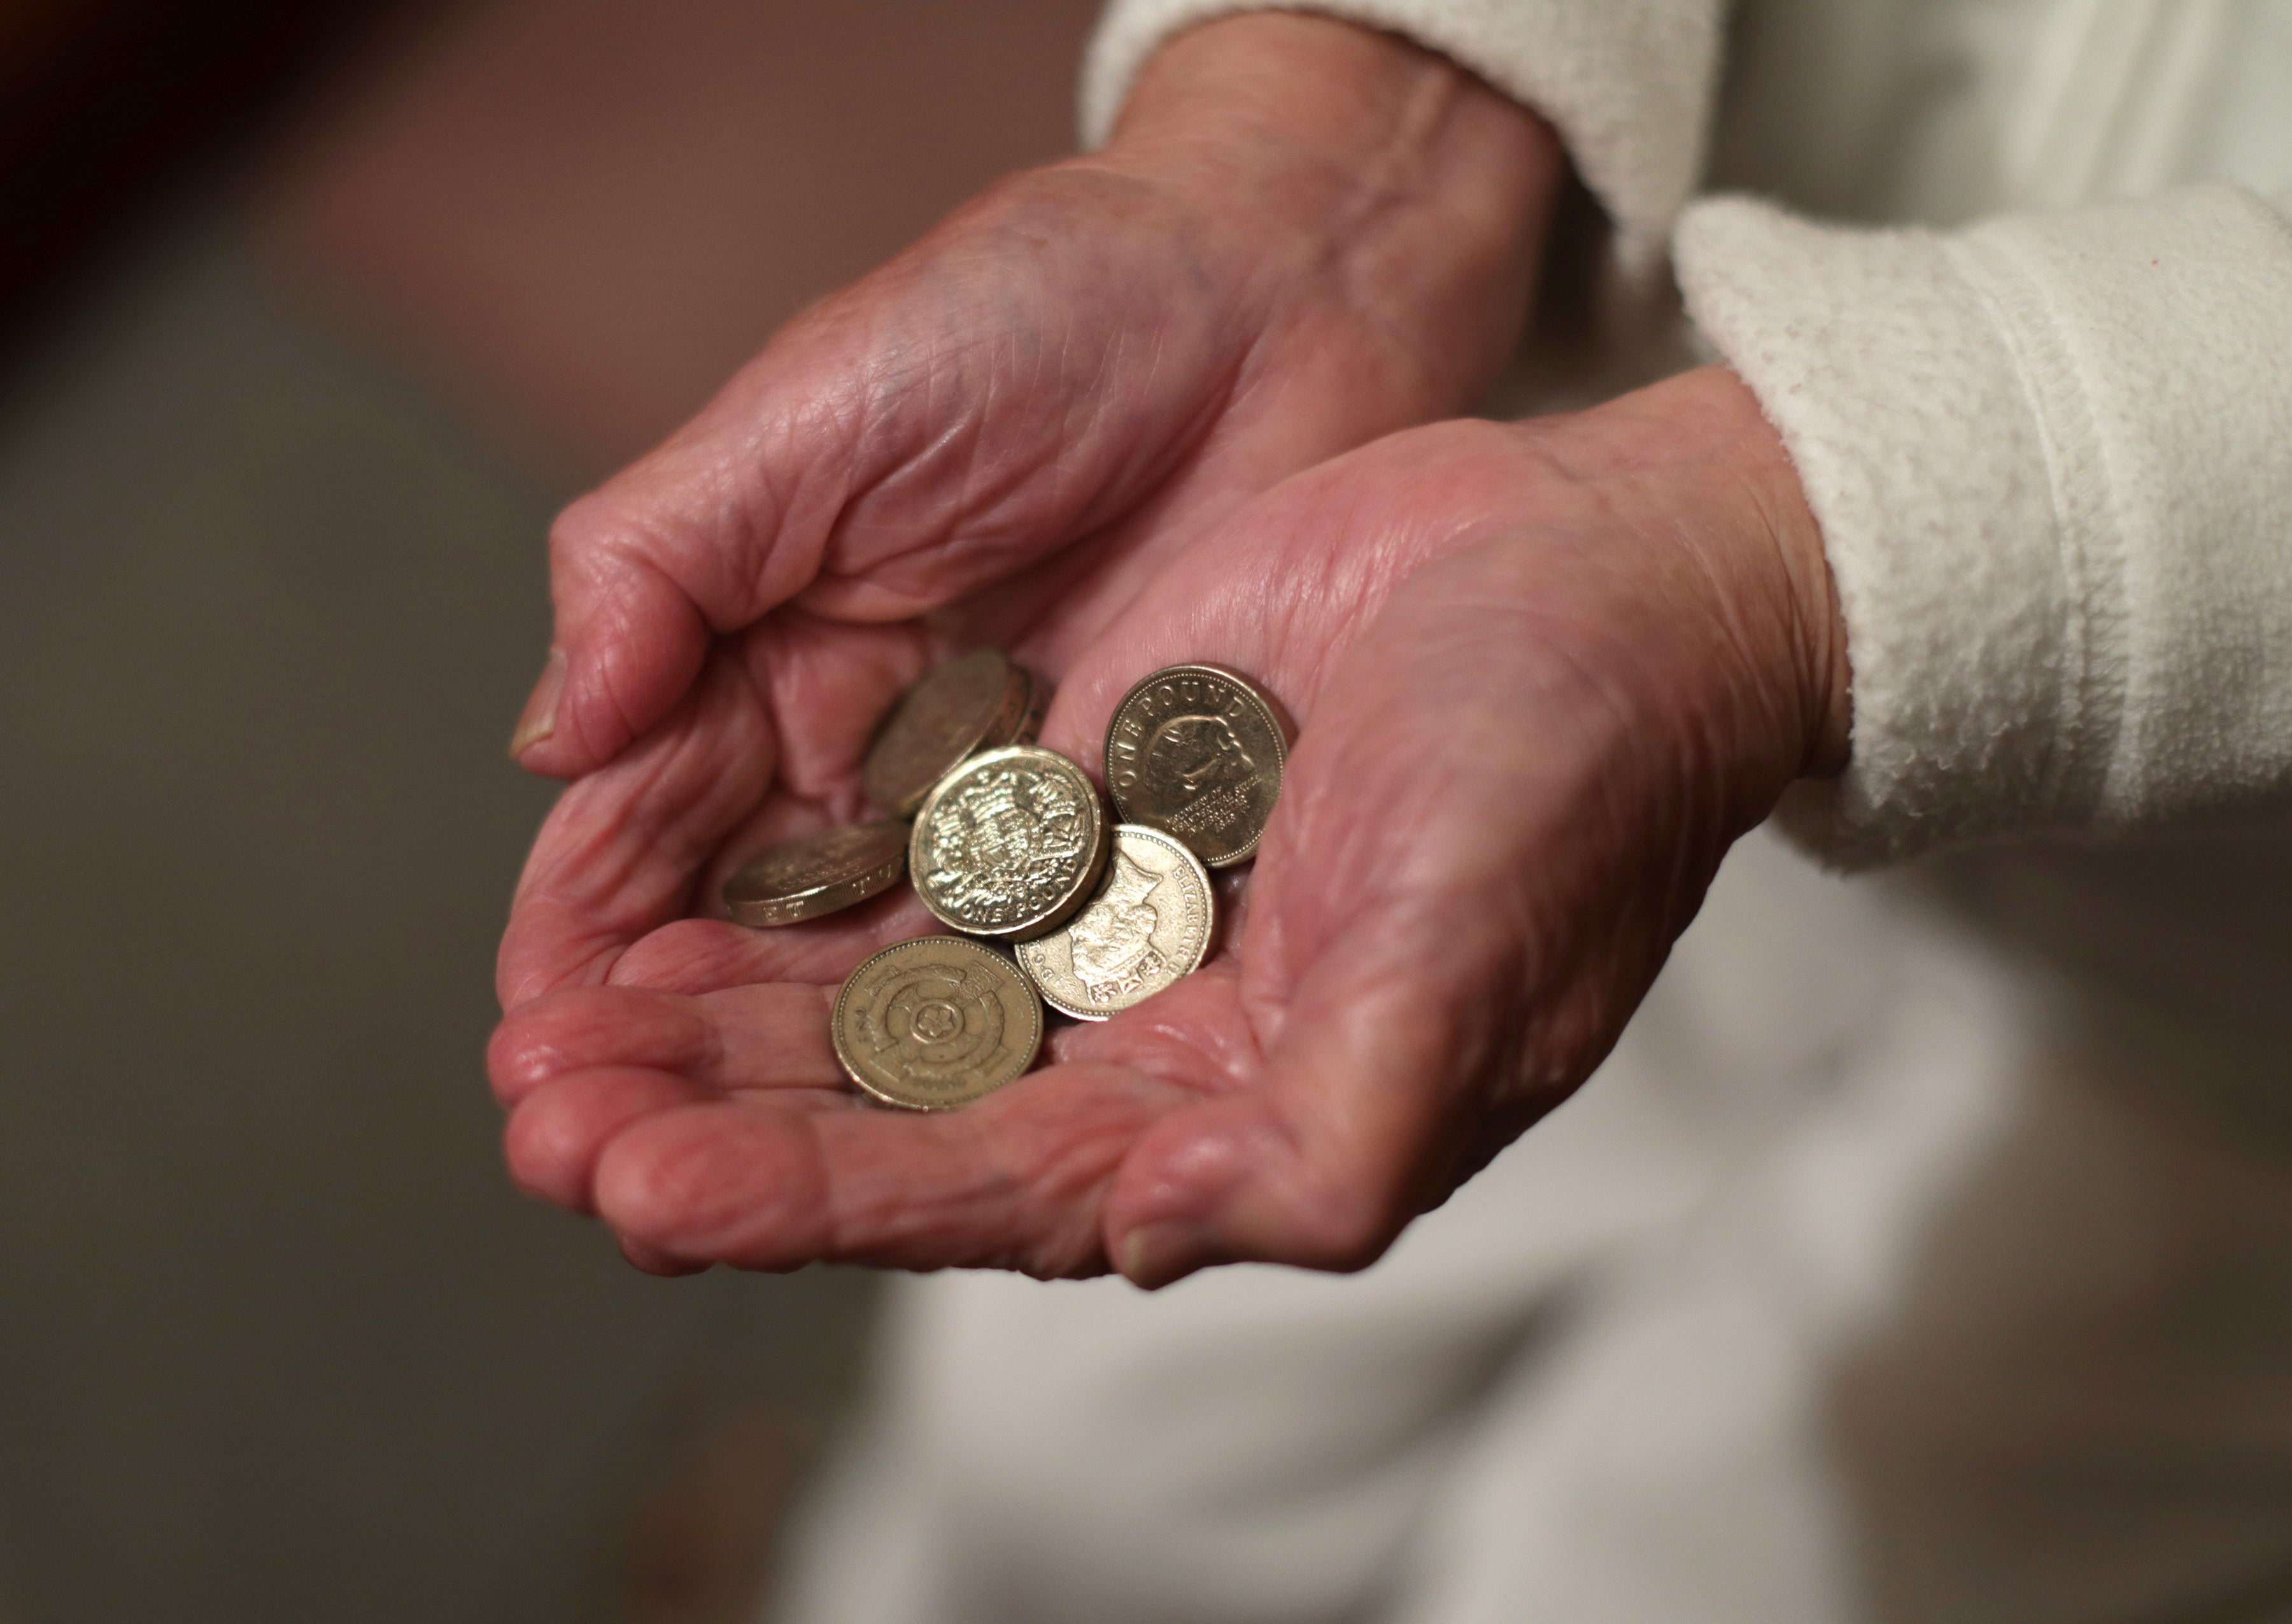 Around one in five retirees has been the victim of a financial scam, a survey shows (Yui Mok/PA)